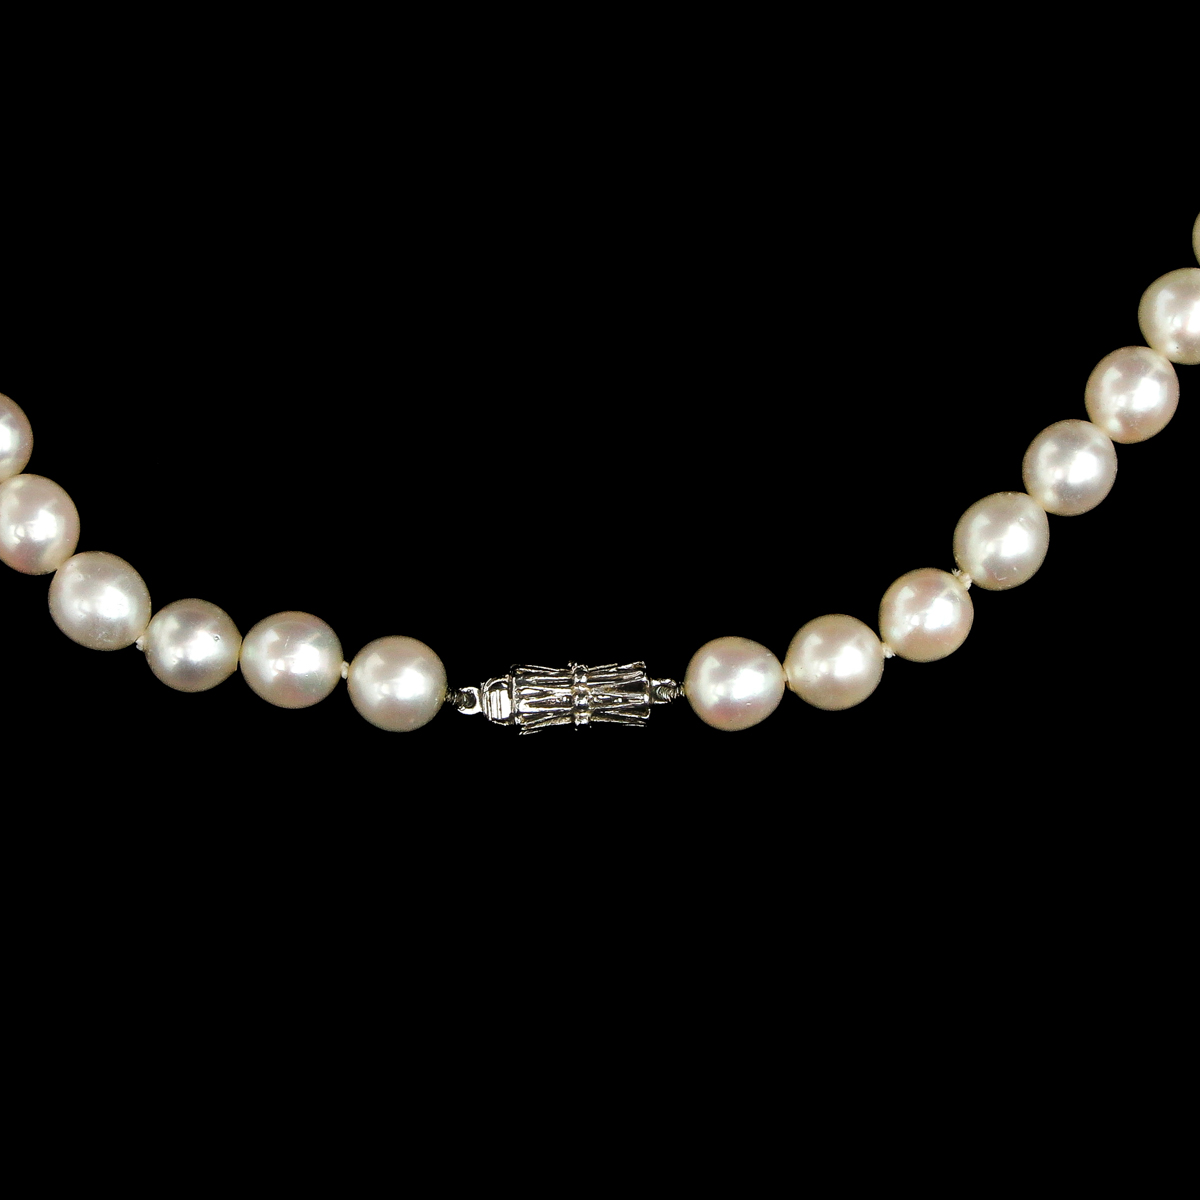 A Collection of 4 Pearl Necklaces - Image 5 of 10